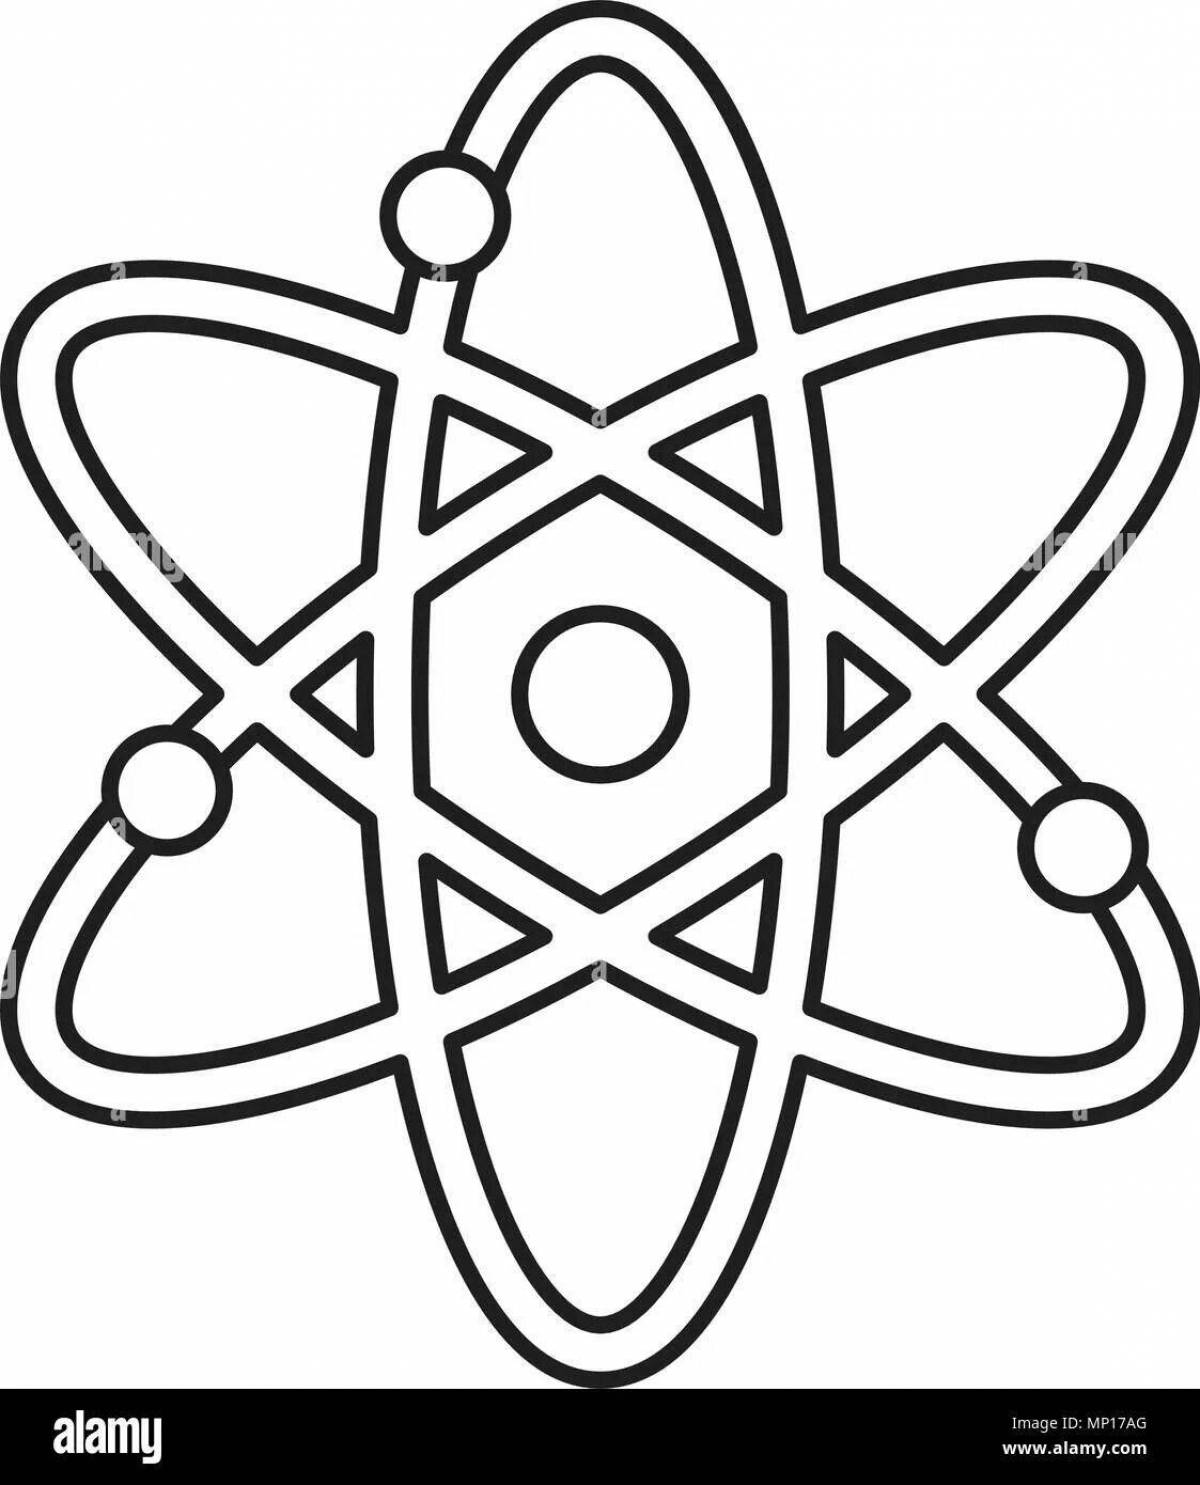 Charming atom coloring page